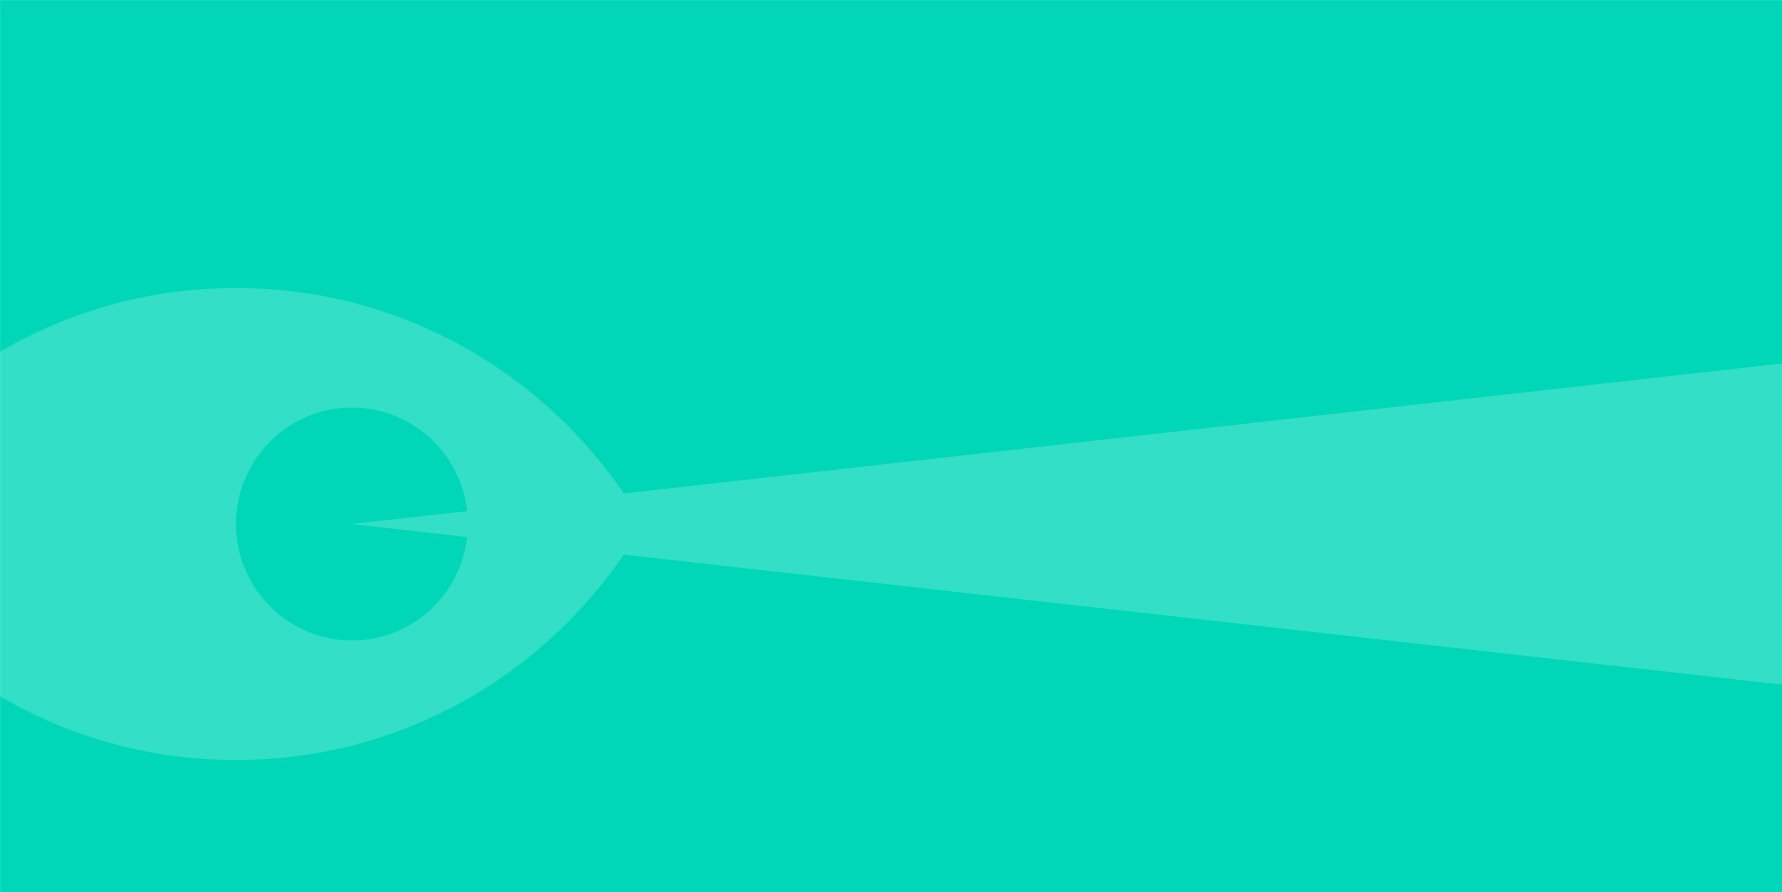 Stylized illustration of teal eyeball and ray of light